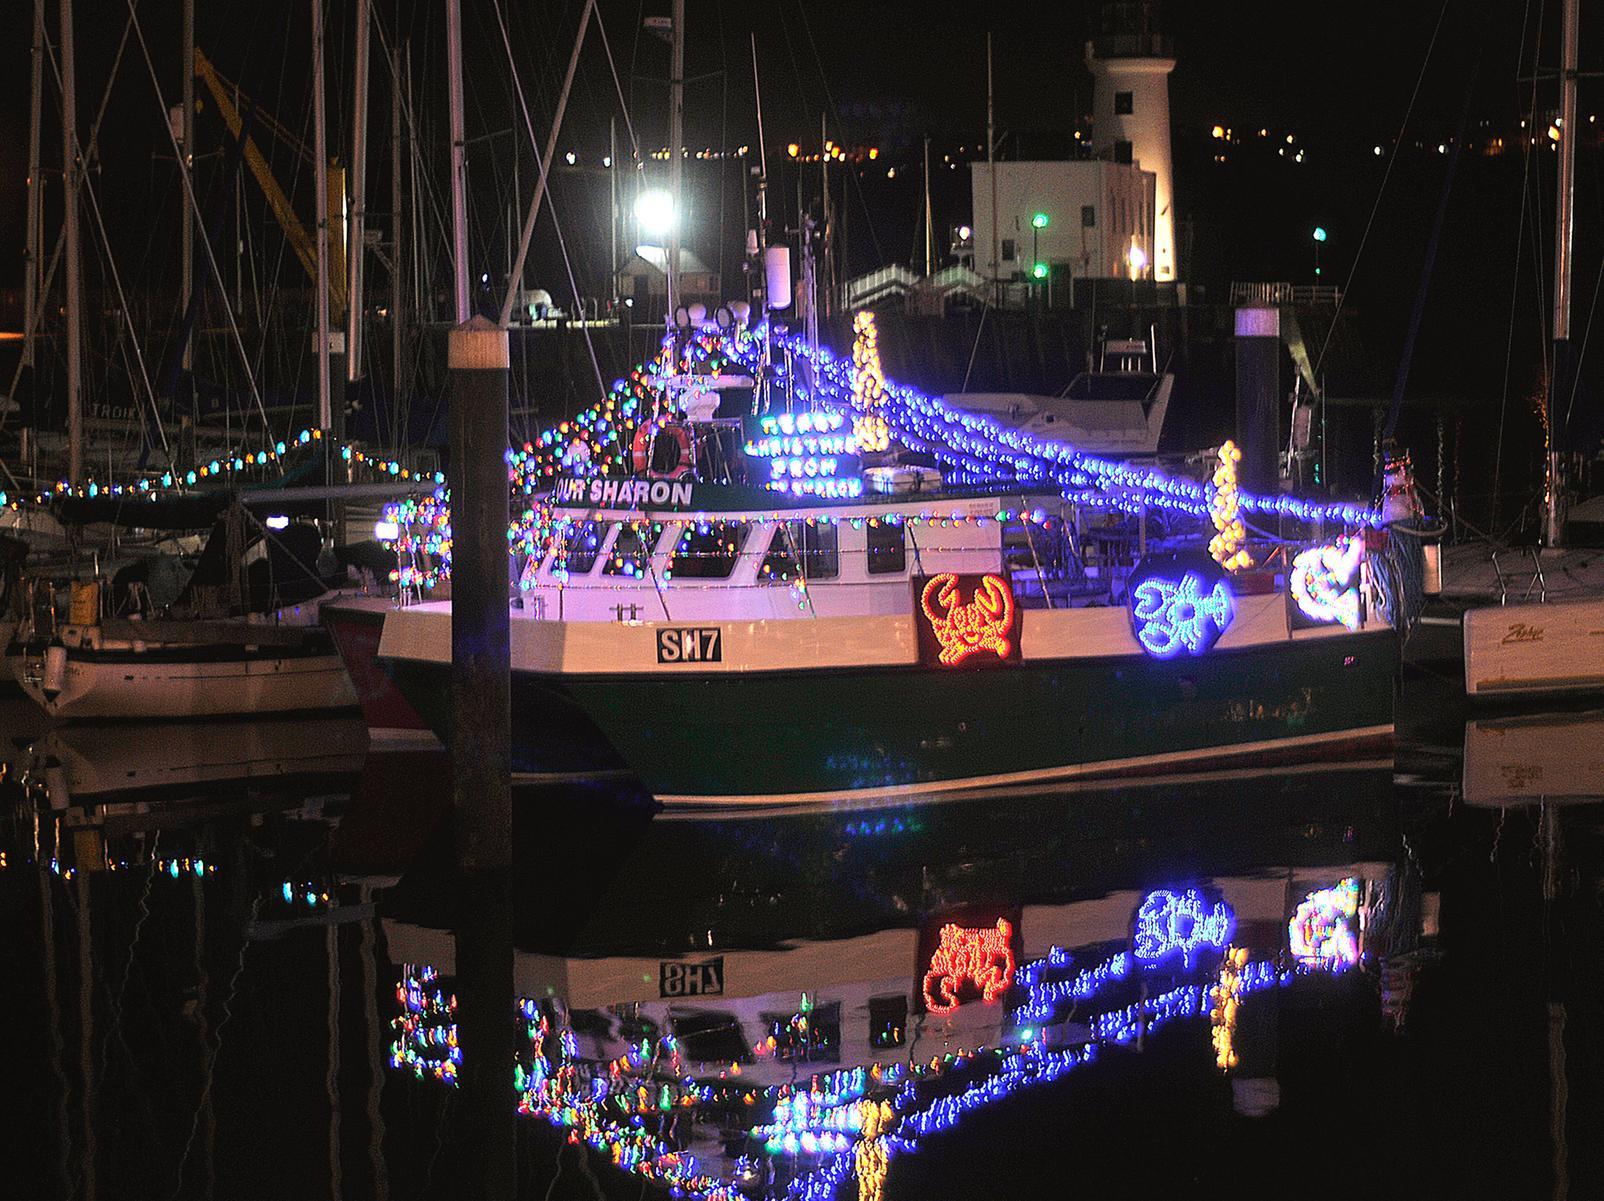 A boat on the harbour lit up for Christmas.